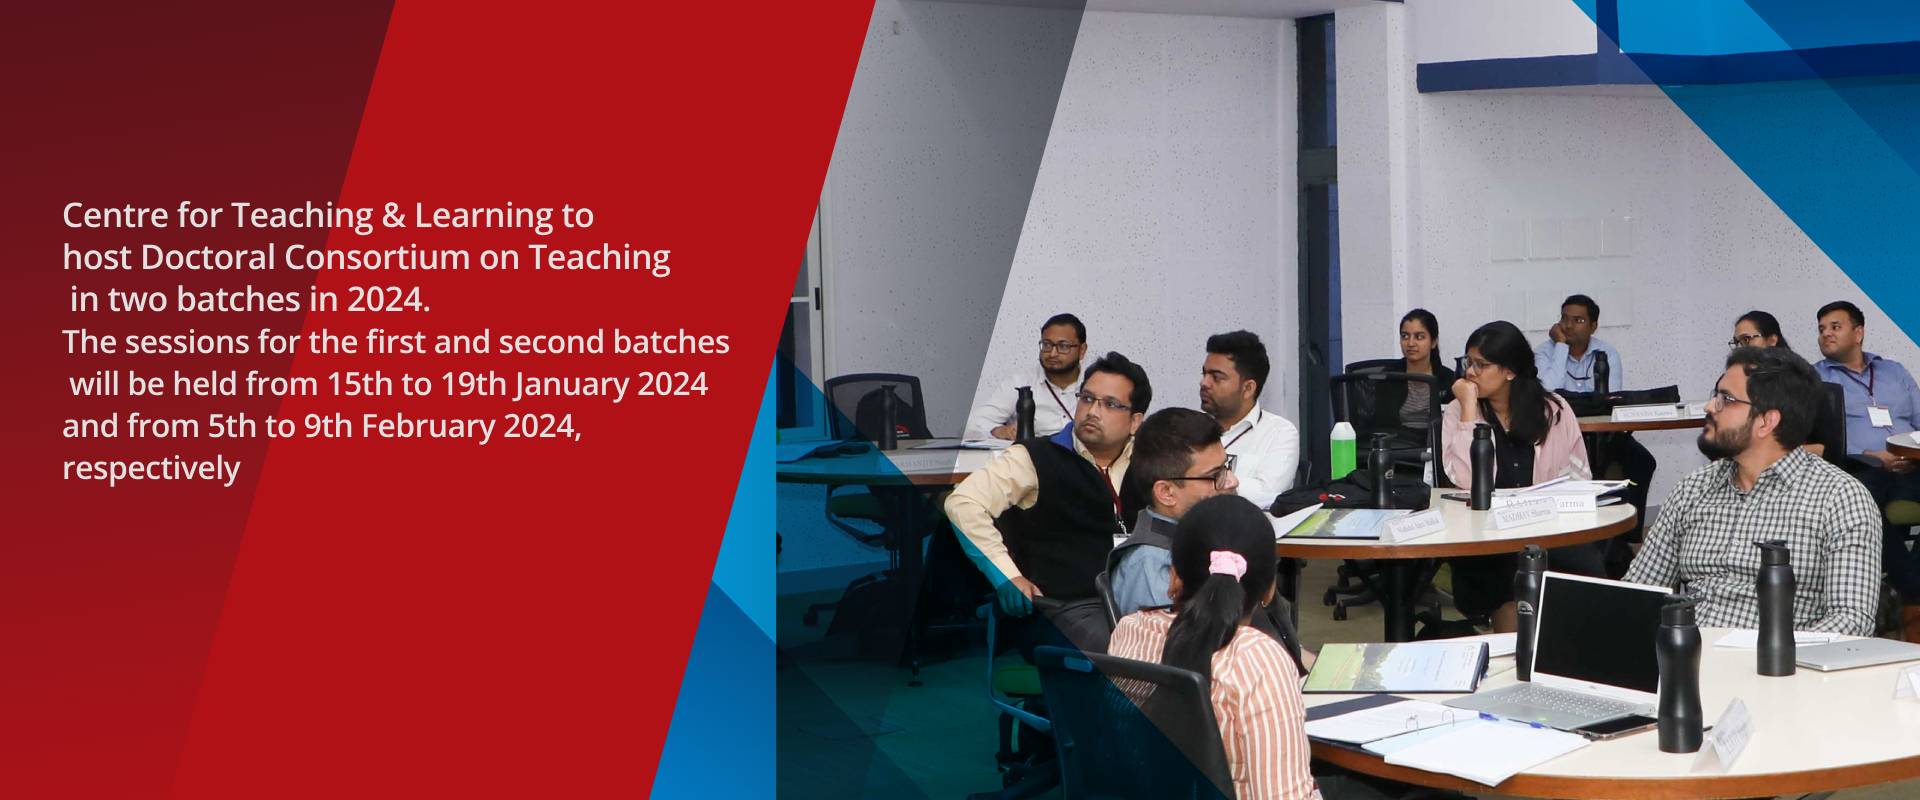 Centre for Teaching & Learning to host Doctoral Consortium on Teaching in two batches in 2024